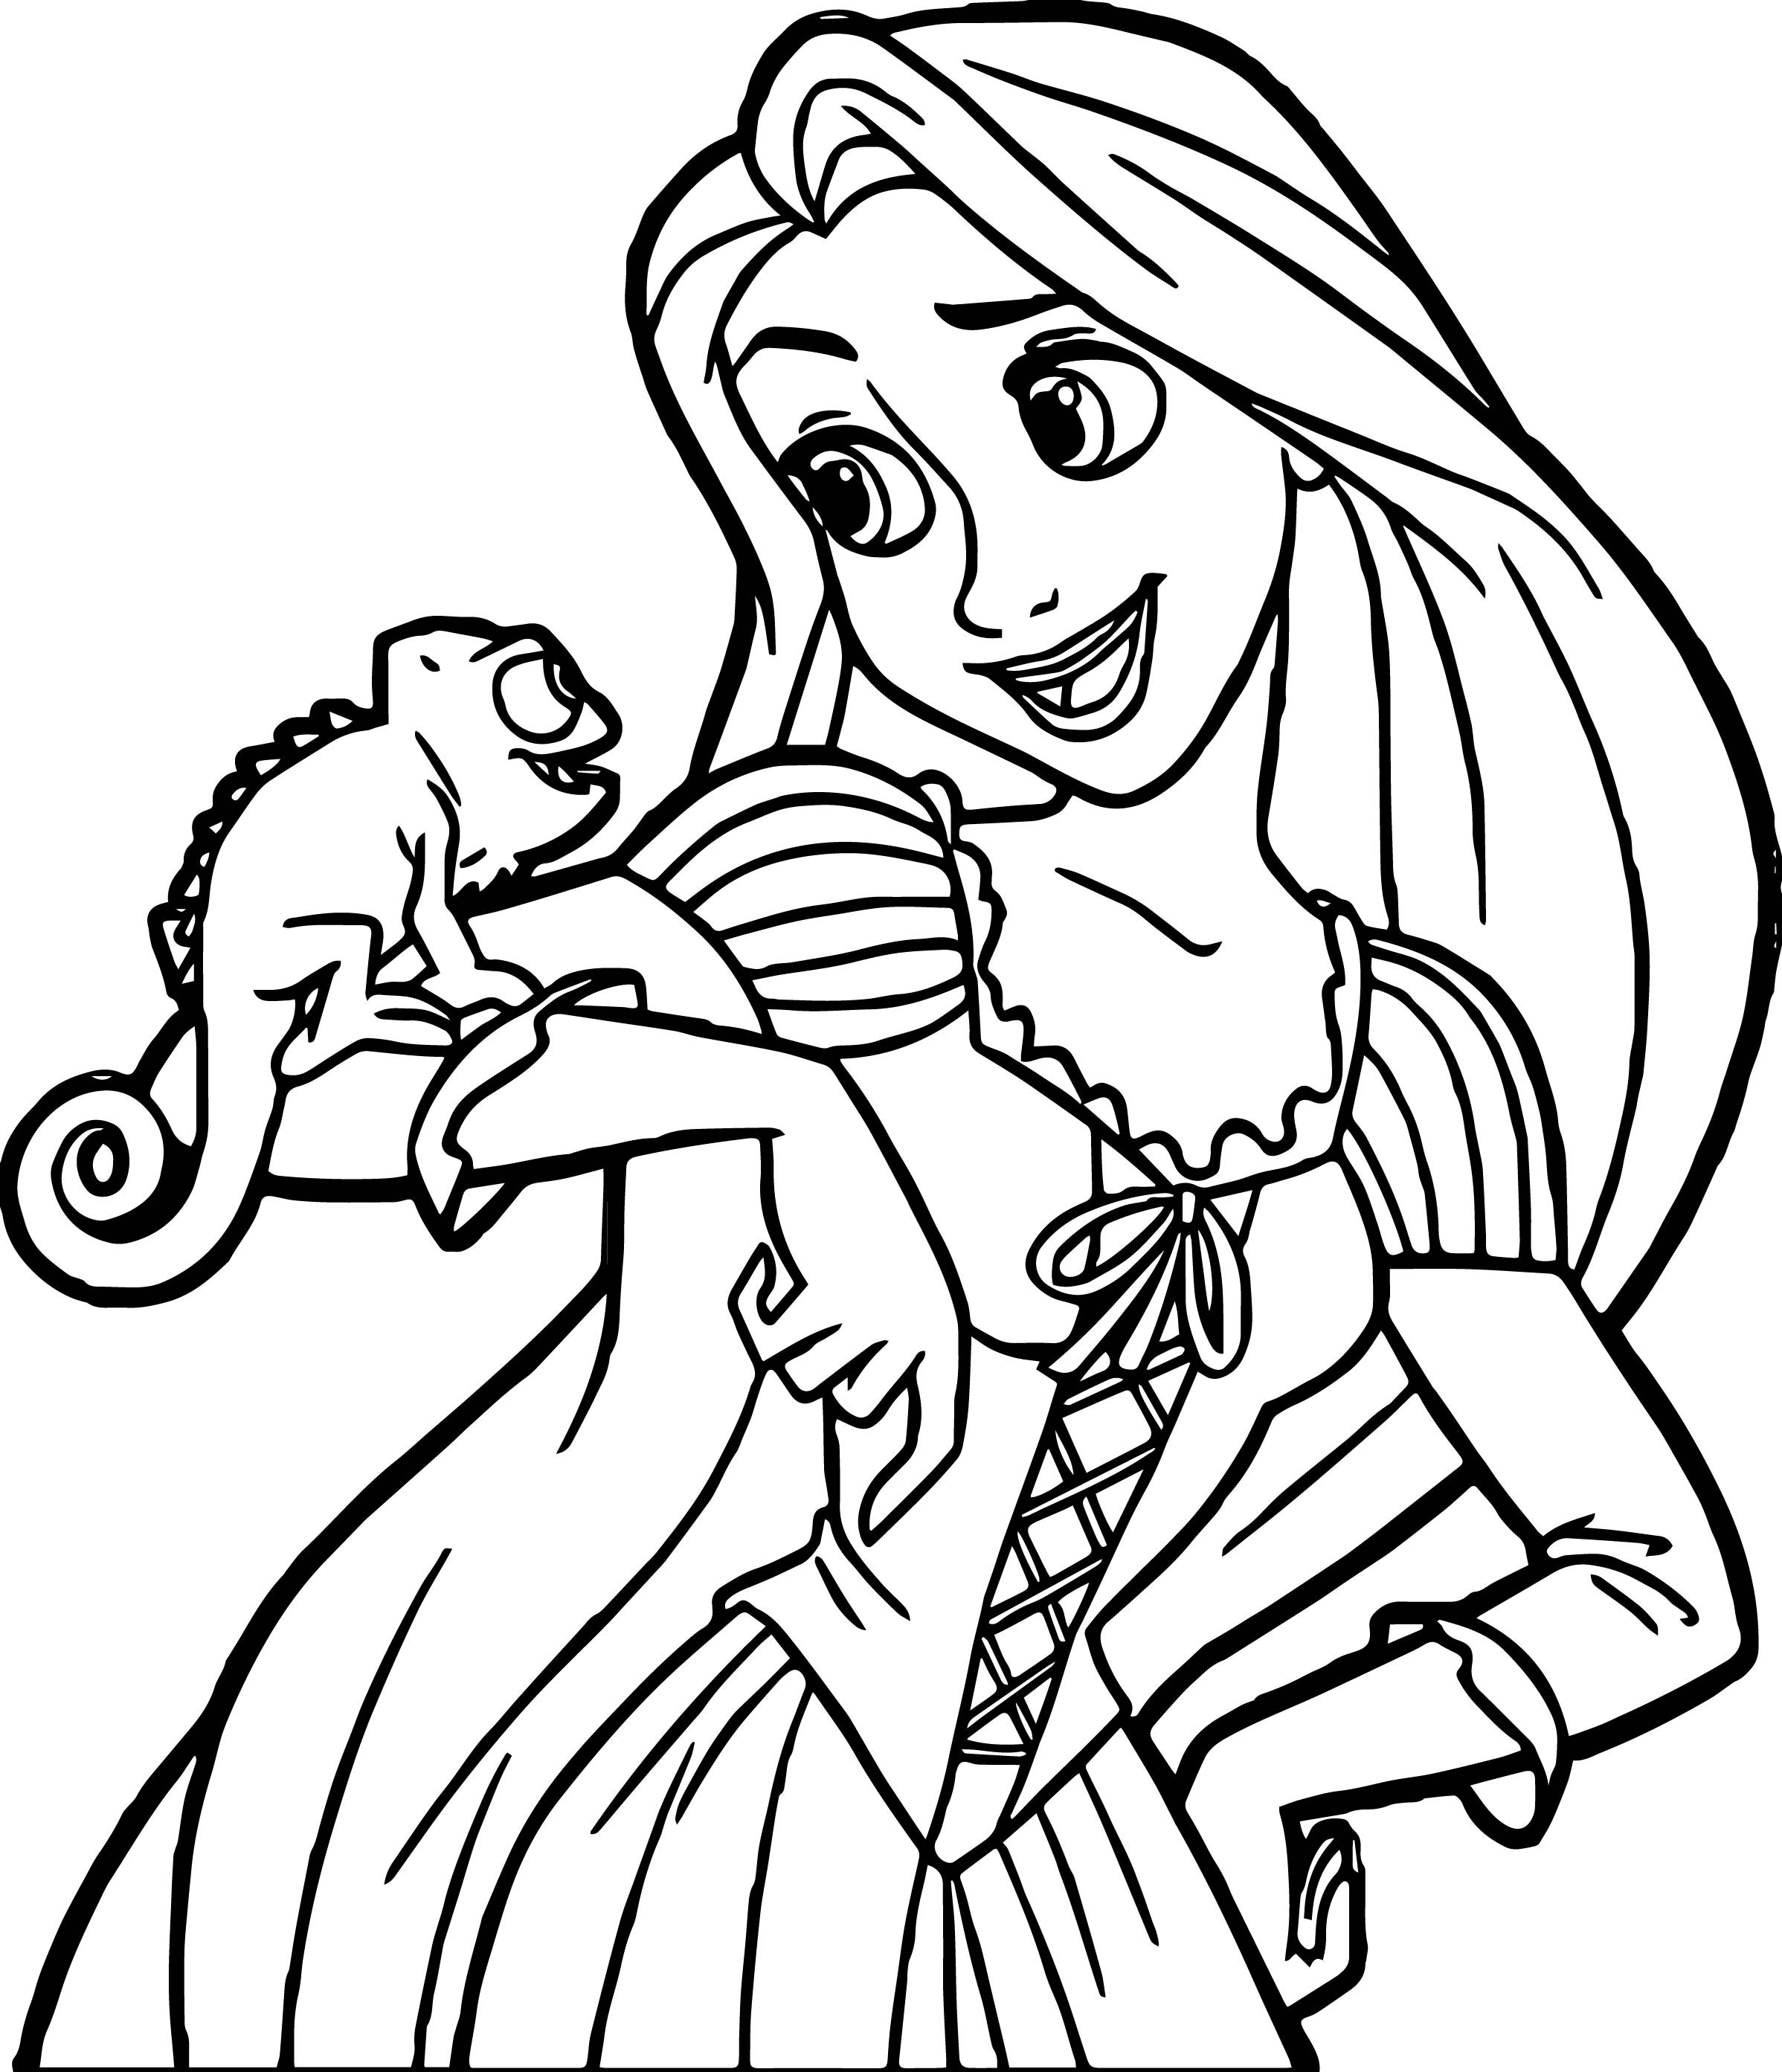 Tangled Coloring Pages For Girls
 Disney Princess Tangled Coloring Page